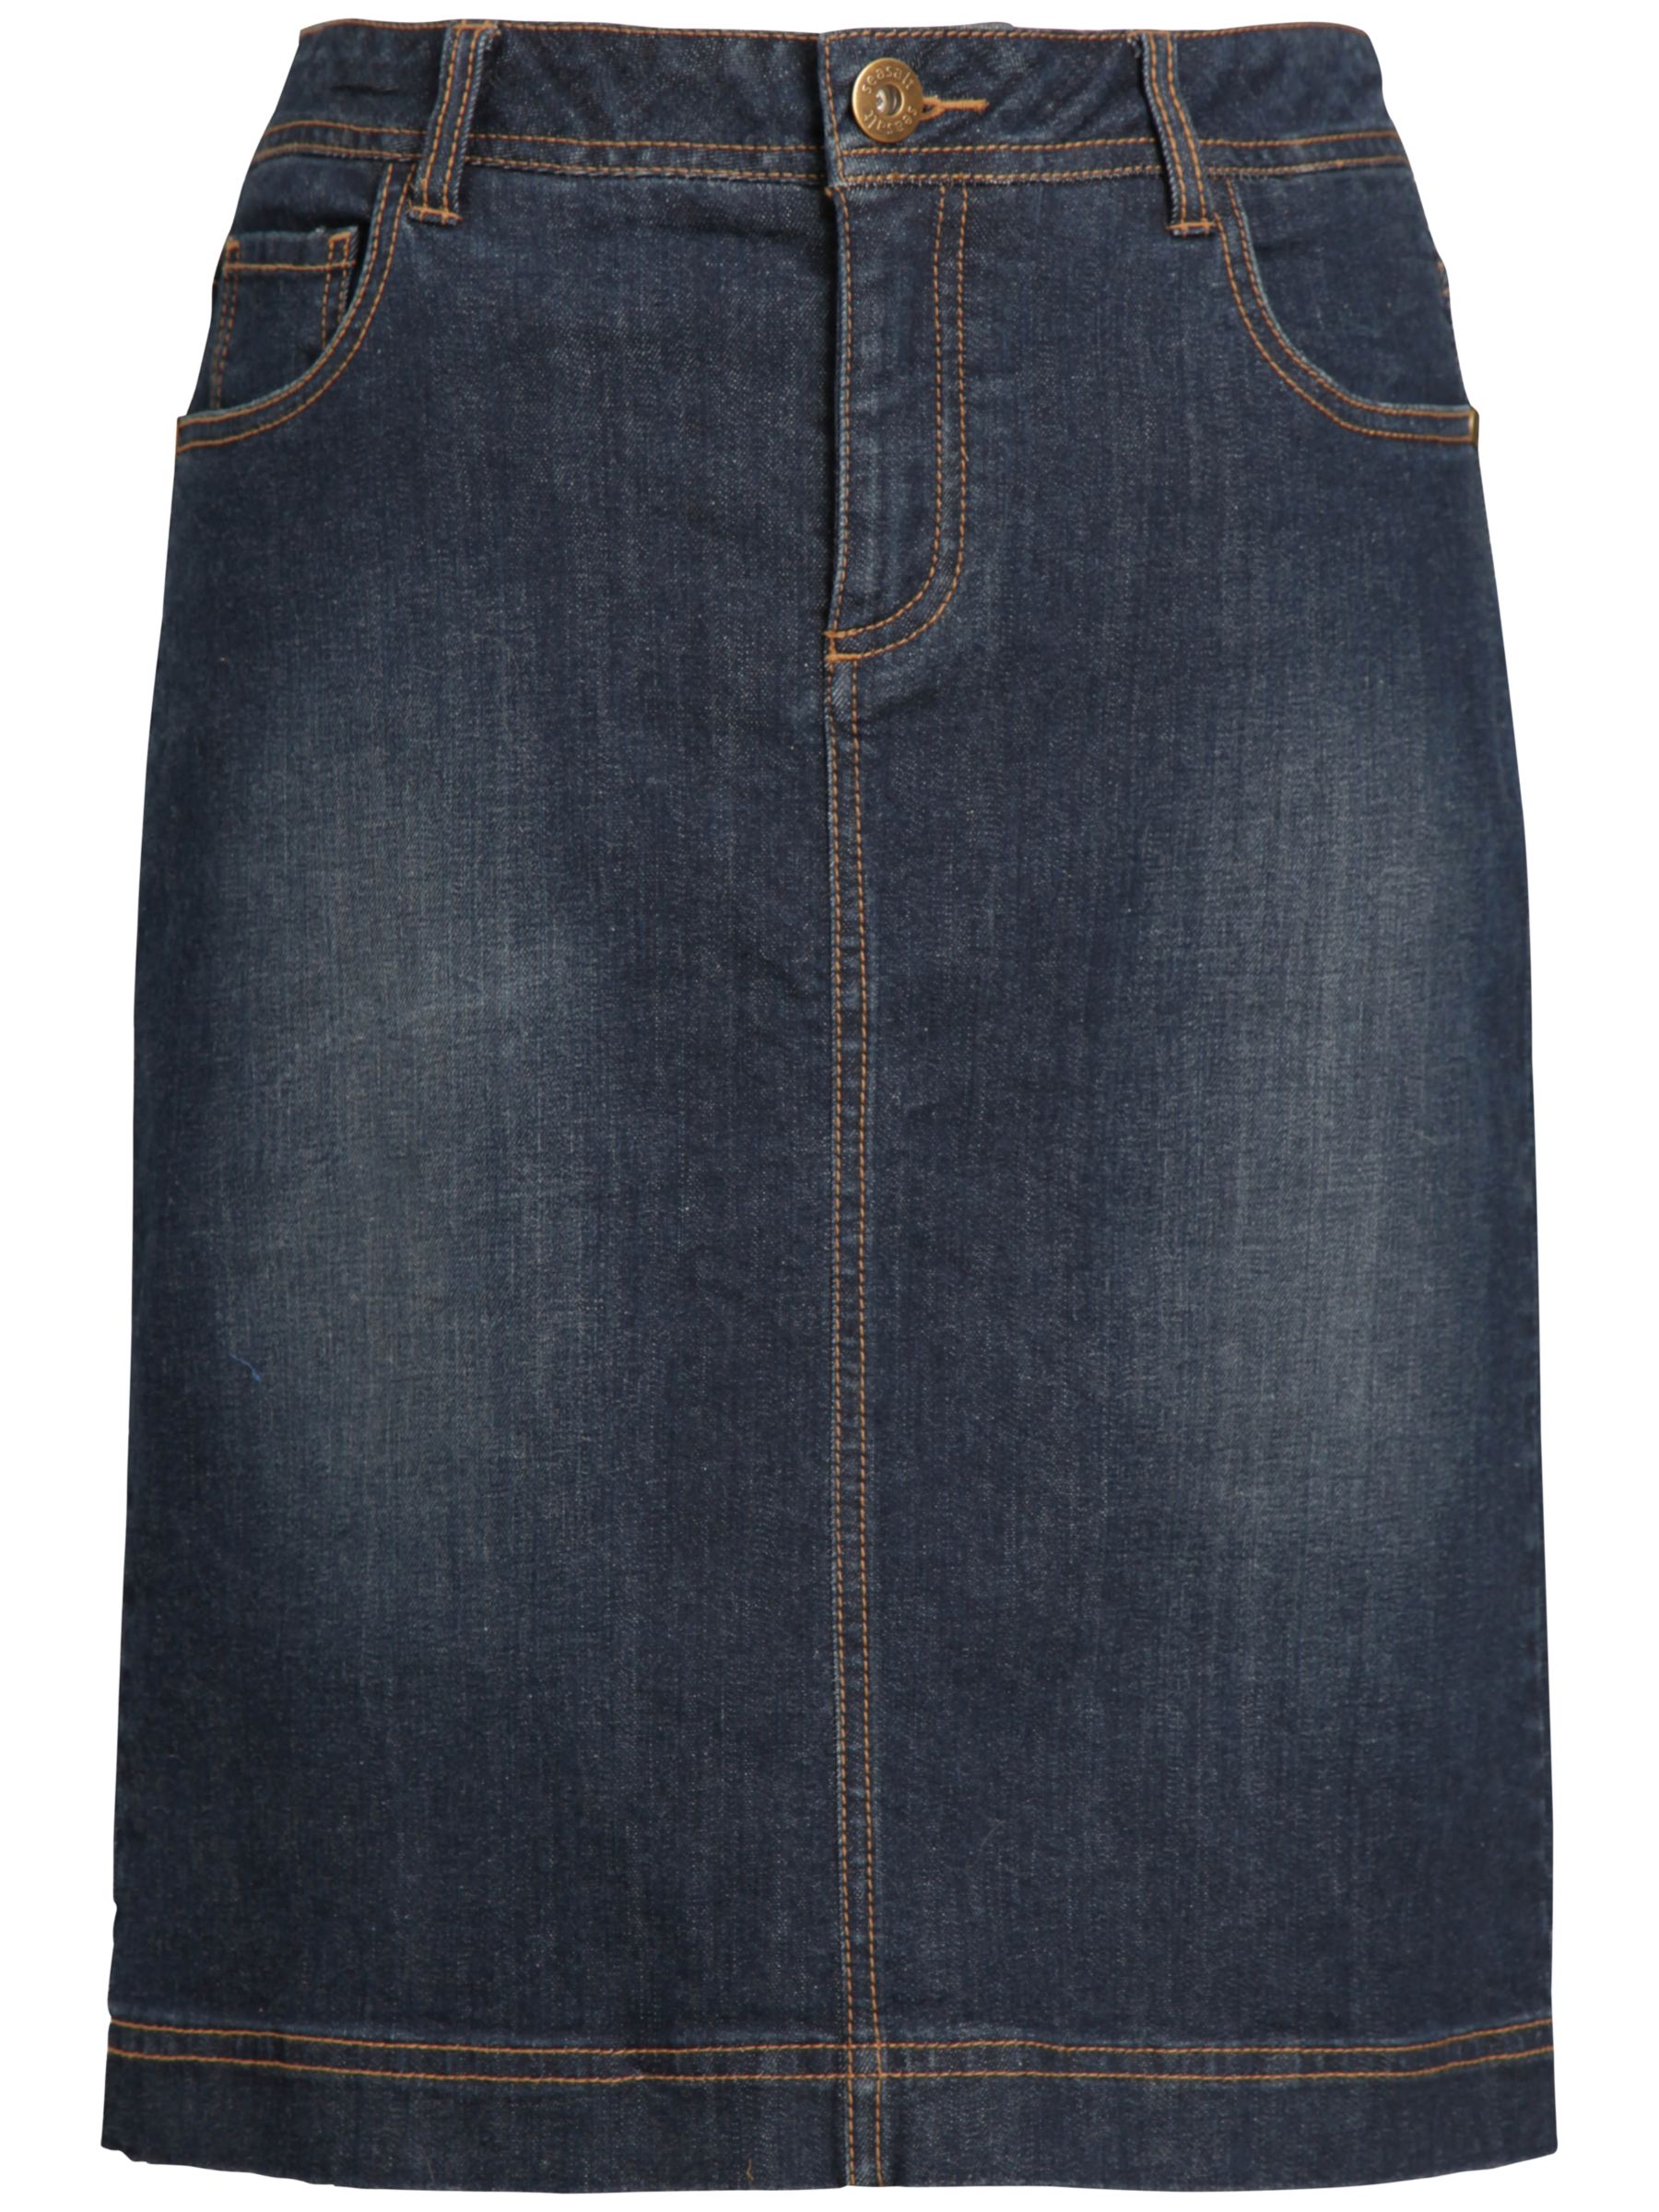 tommy jean overalls